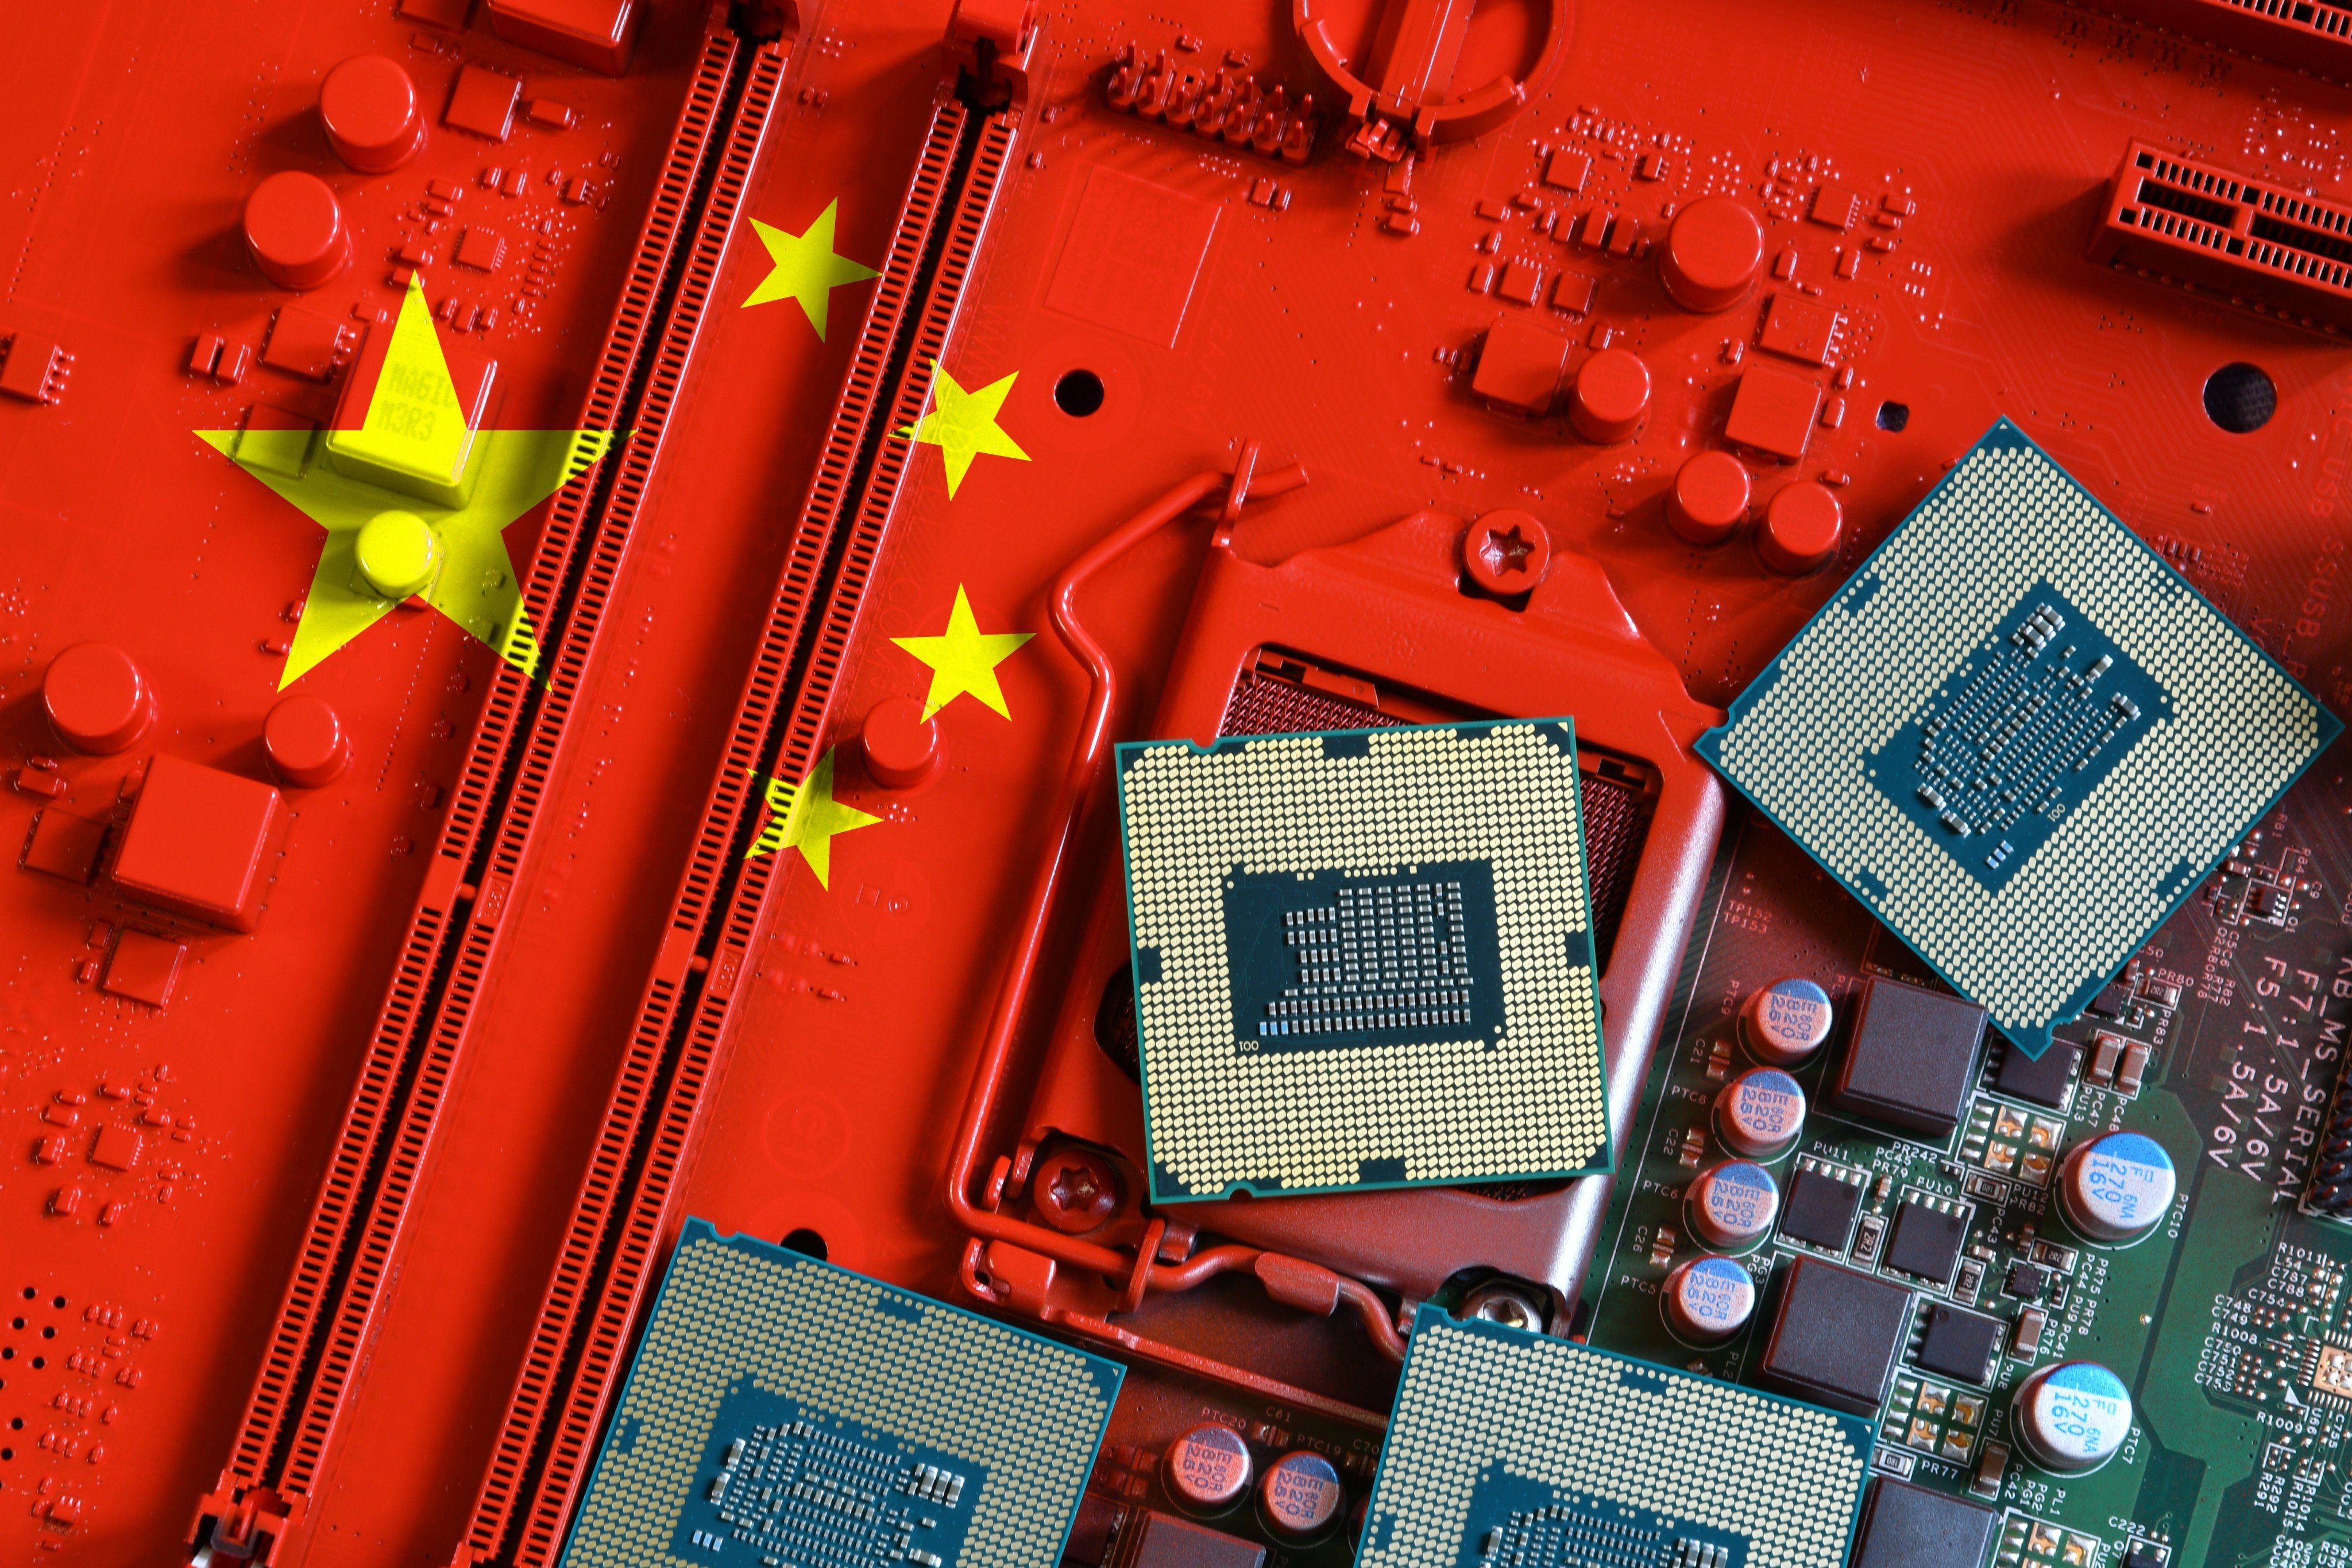 Science and technology has emerged as a priority area for Beijing. Photo: Shutterstock Images